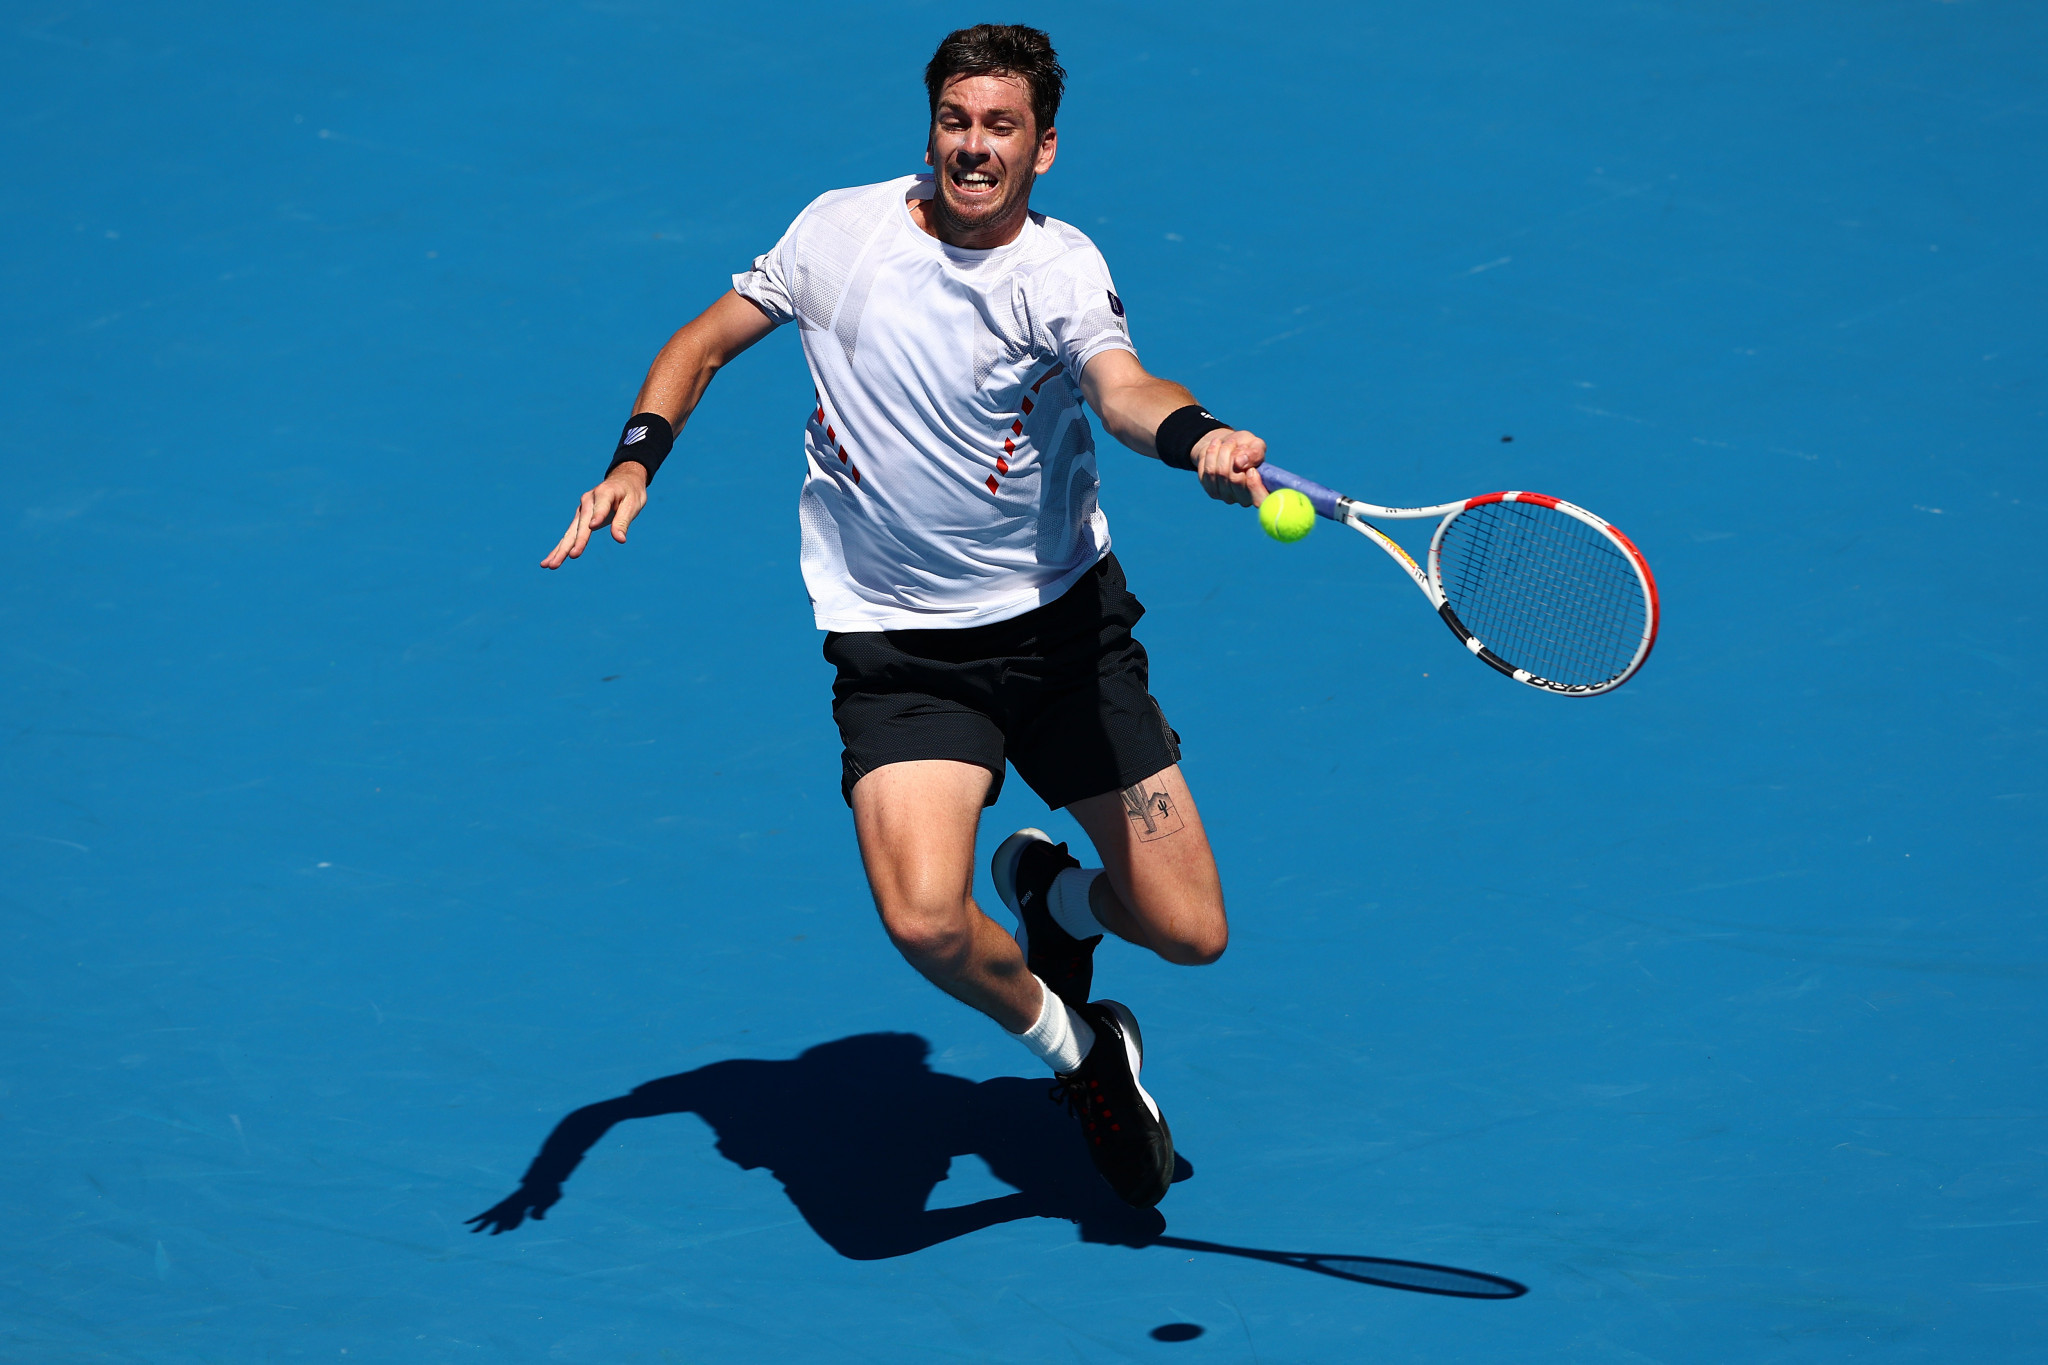 Britain's Cameron Norrie was the highest seed in the men's singles draw to lose on the first day of the Australian Open ©Getty Images